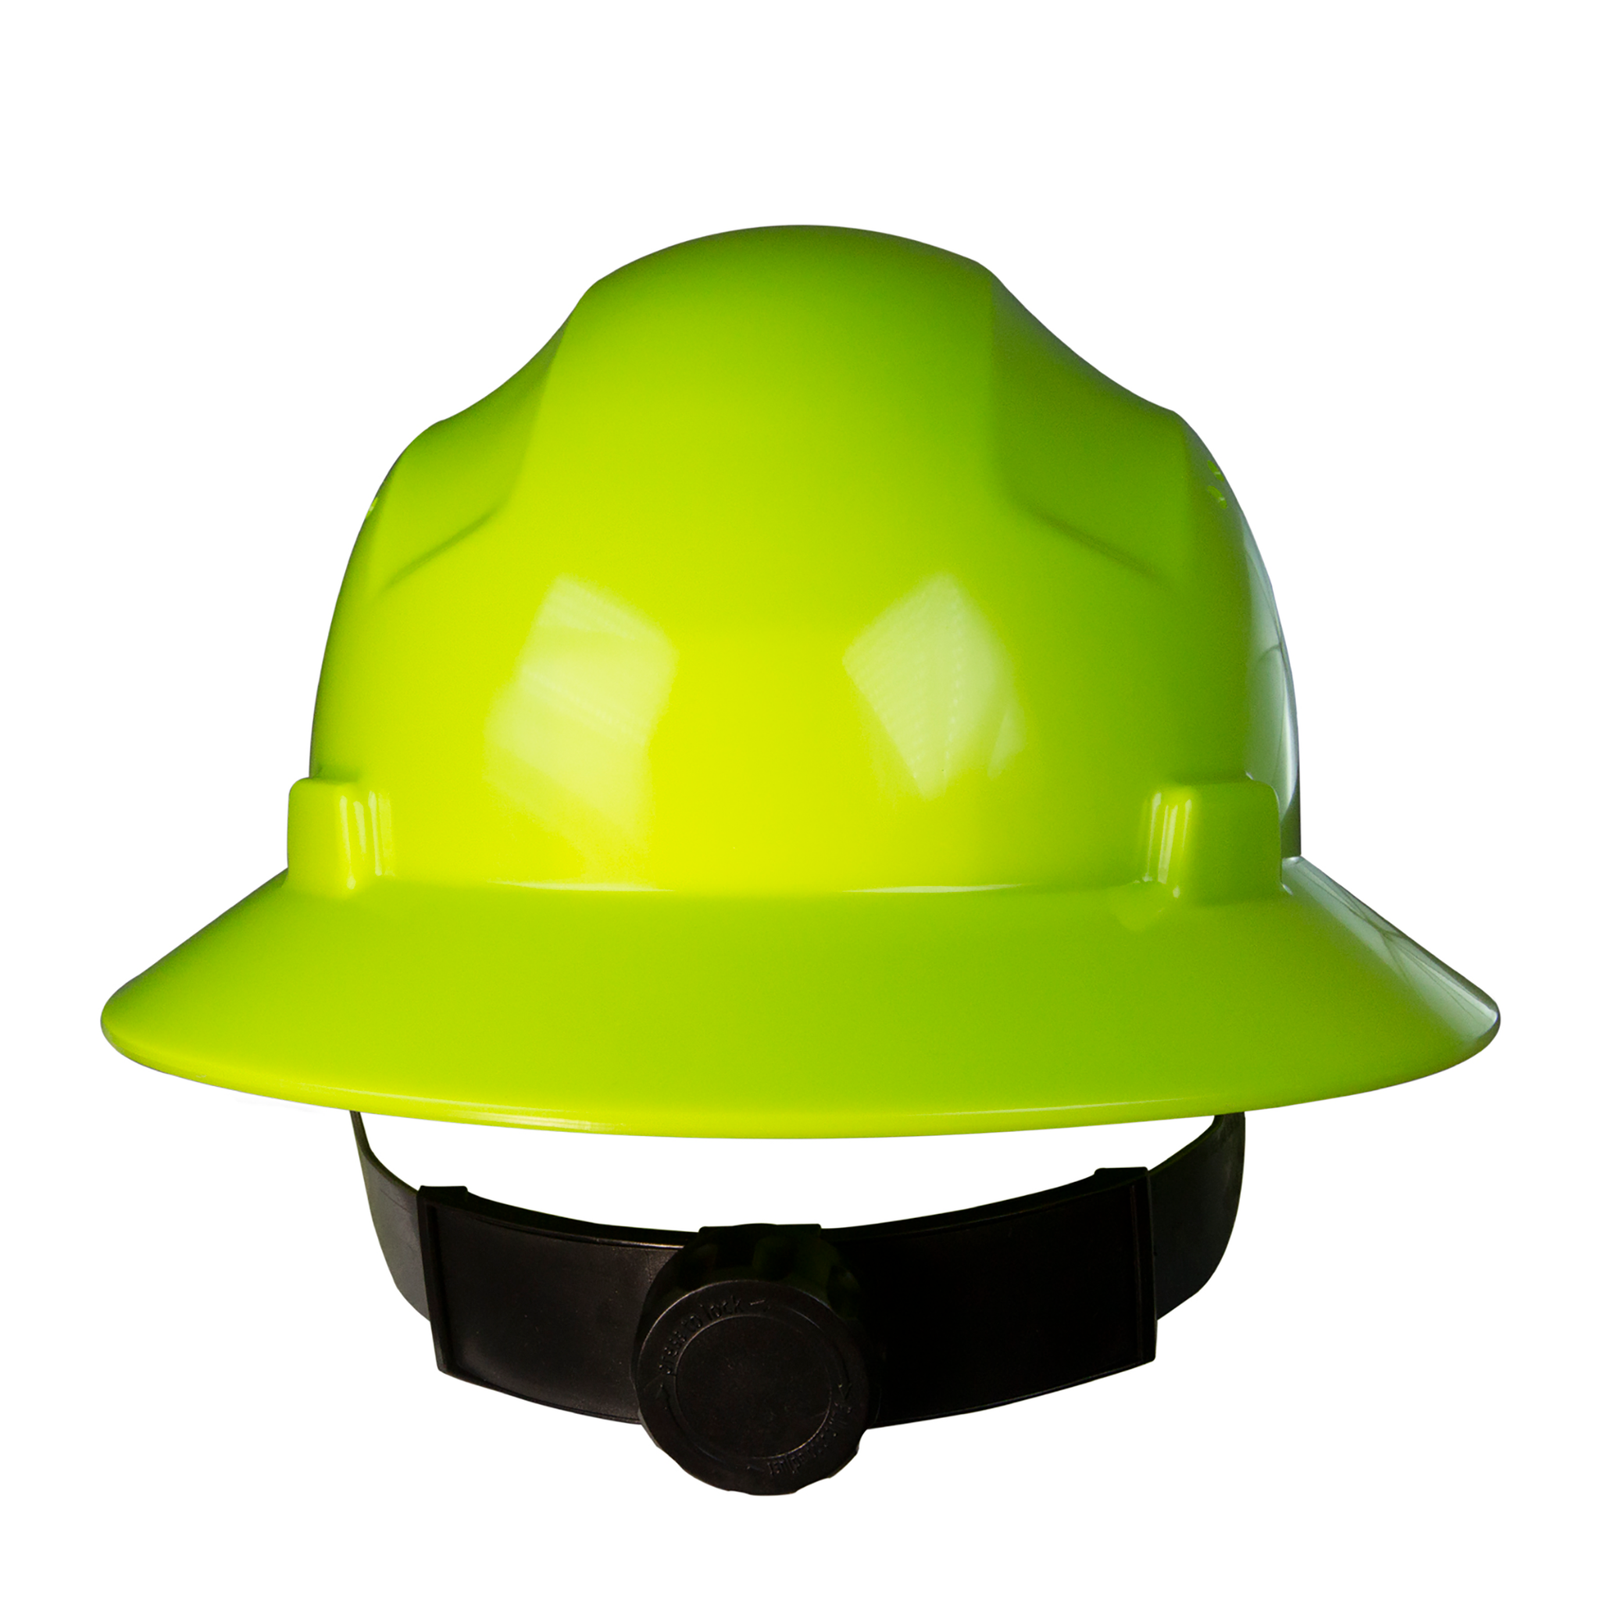 Full brim lime safety hard hat with 4 point suspension and black ratchet